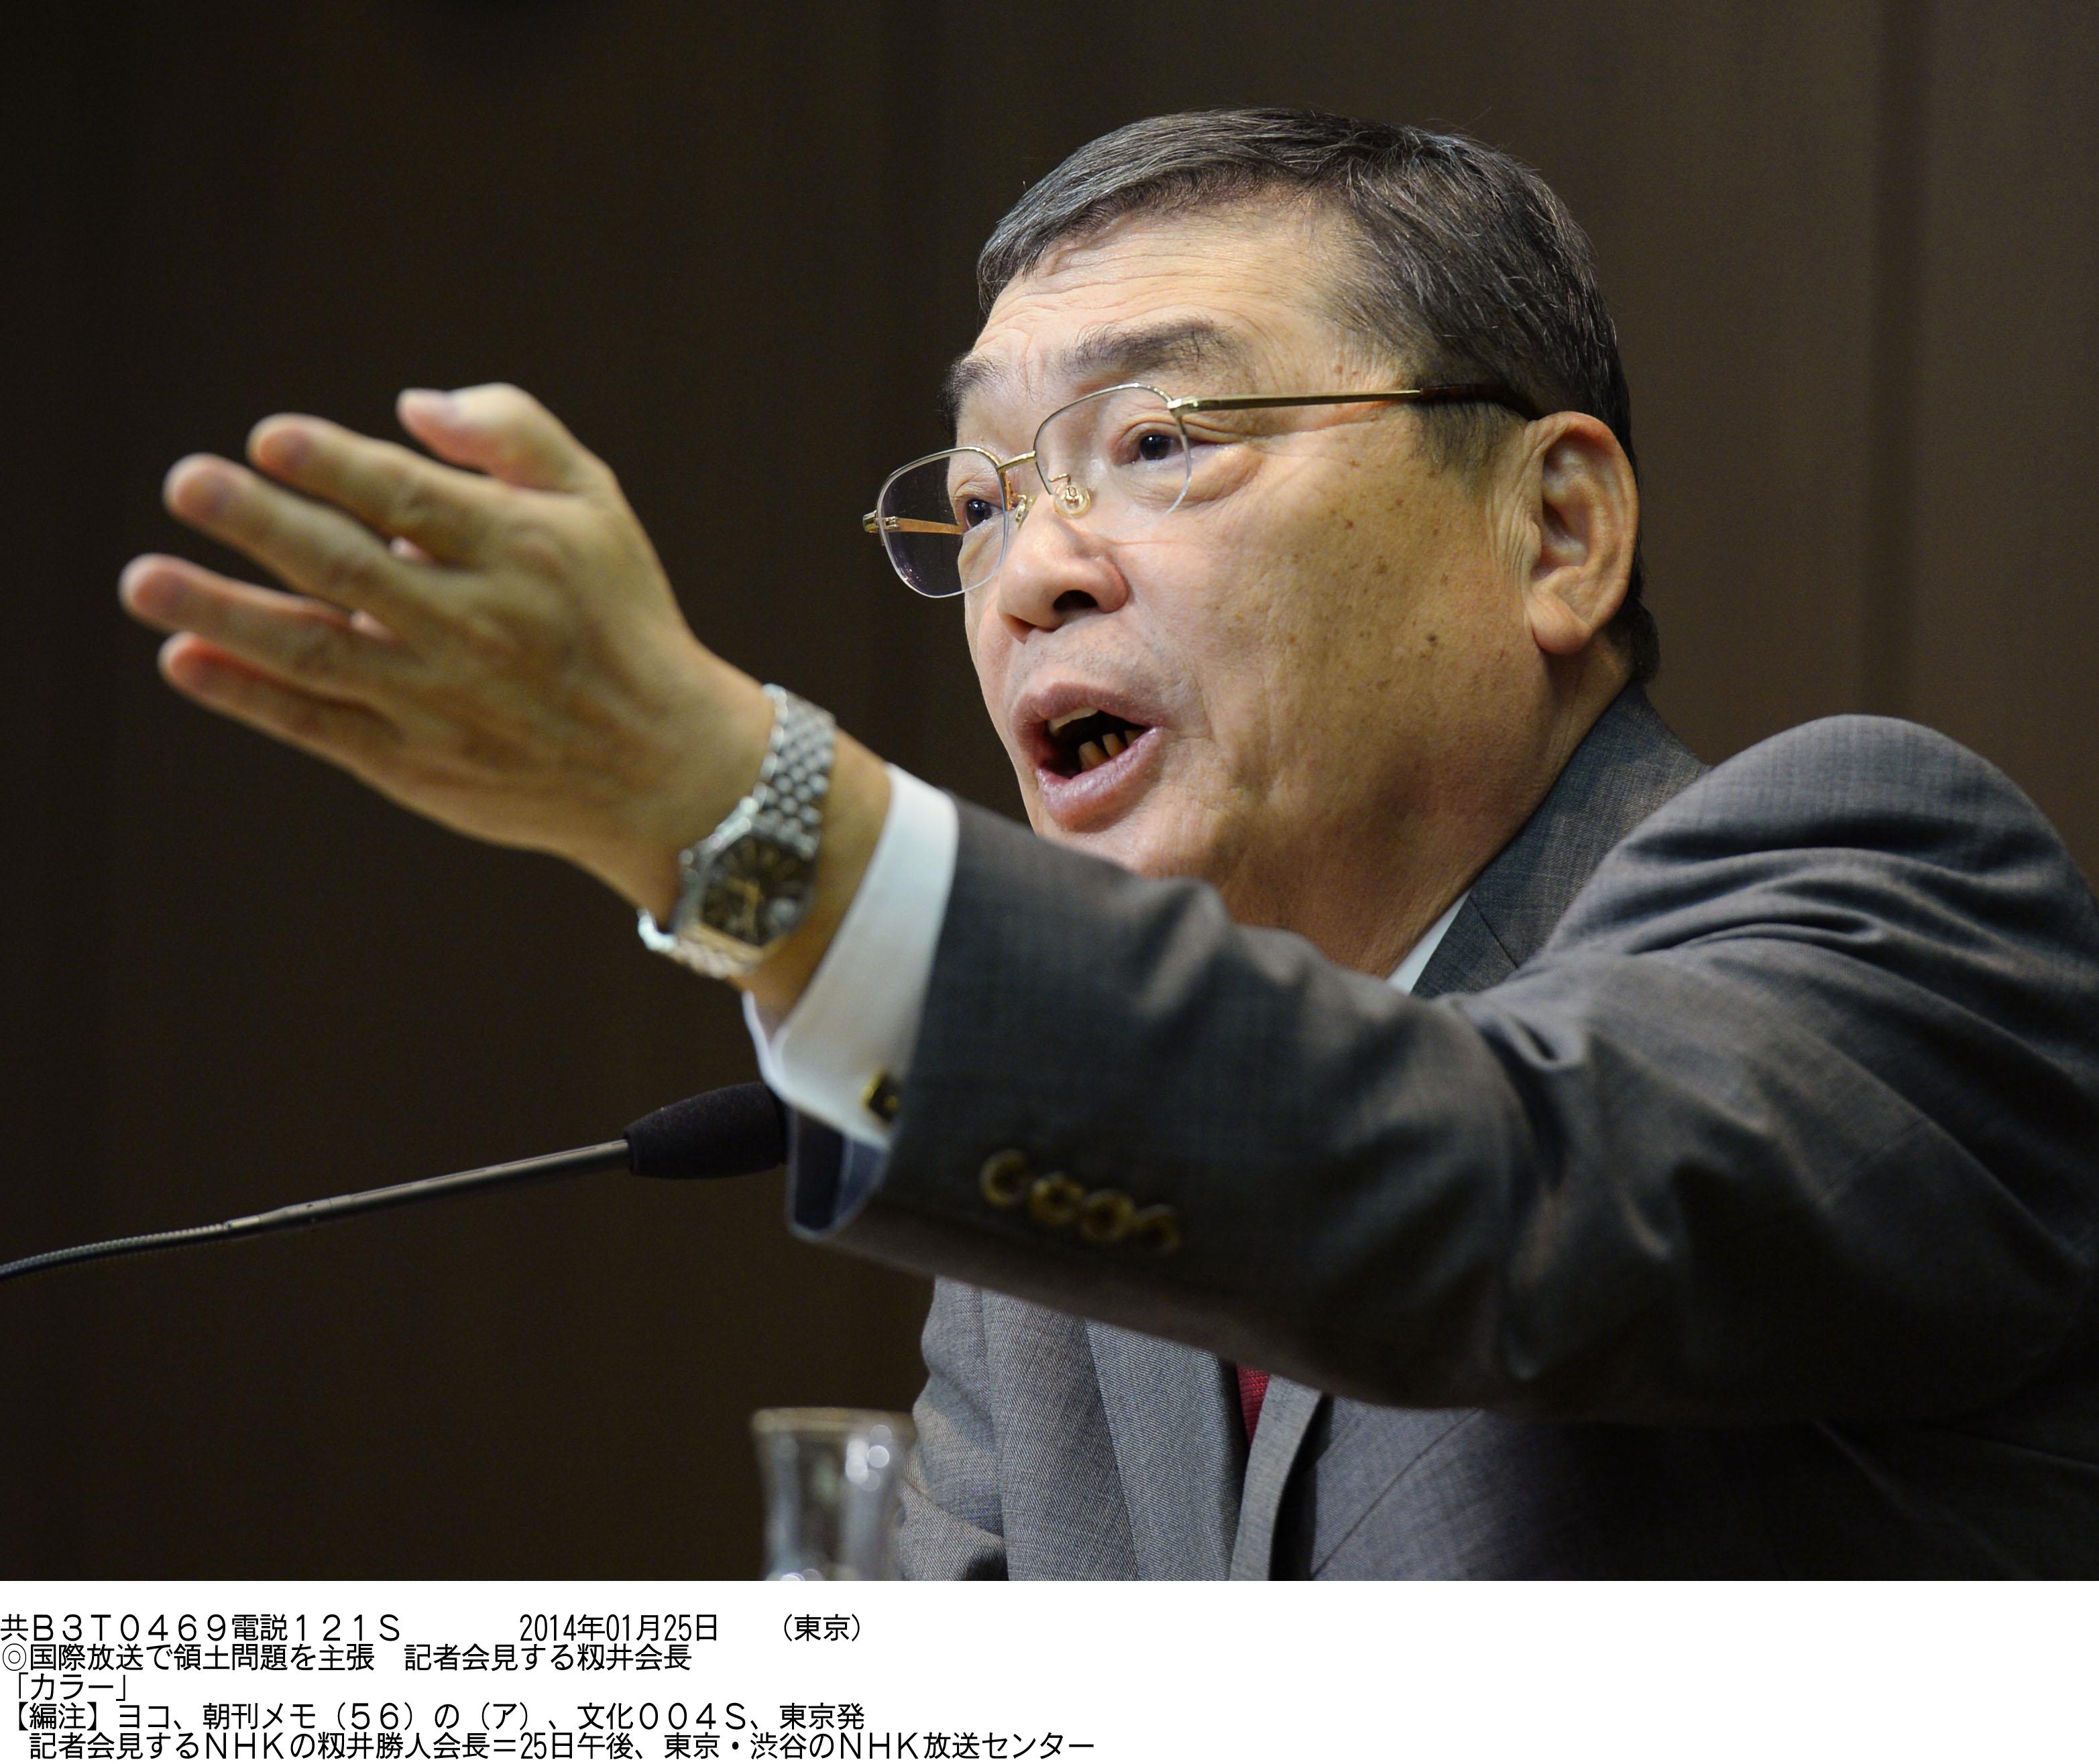 New NHK Chairman Katsuto Momii speaks to reporters at his first news conference in Tokyo on Jan. 25, immediately after taking over the public broadcaster's top post, during which he causes an uproar for a series of explosive remarks. | KYODO